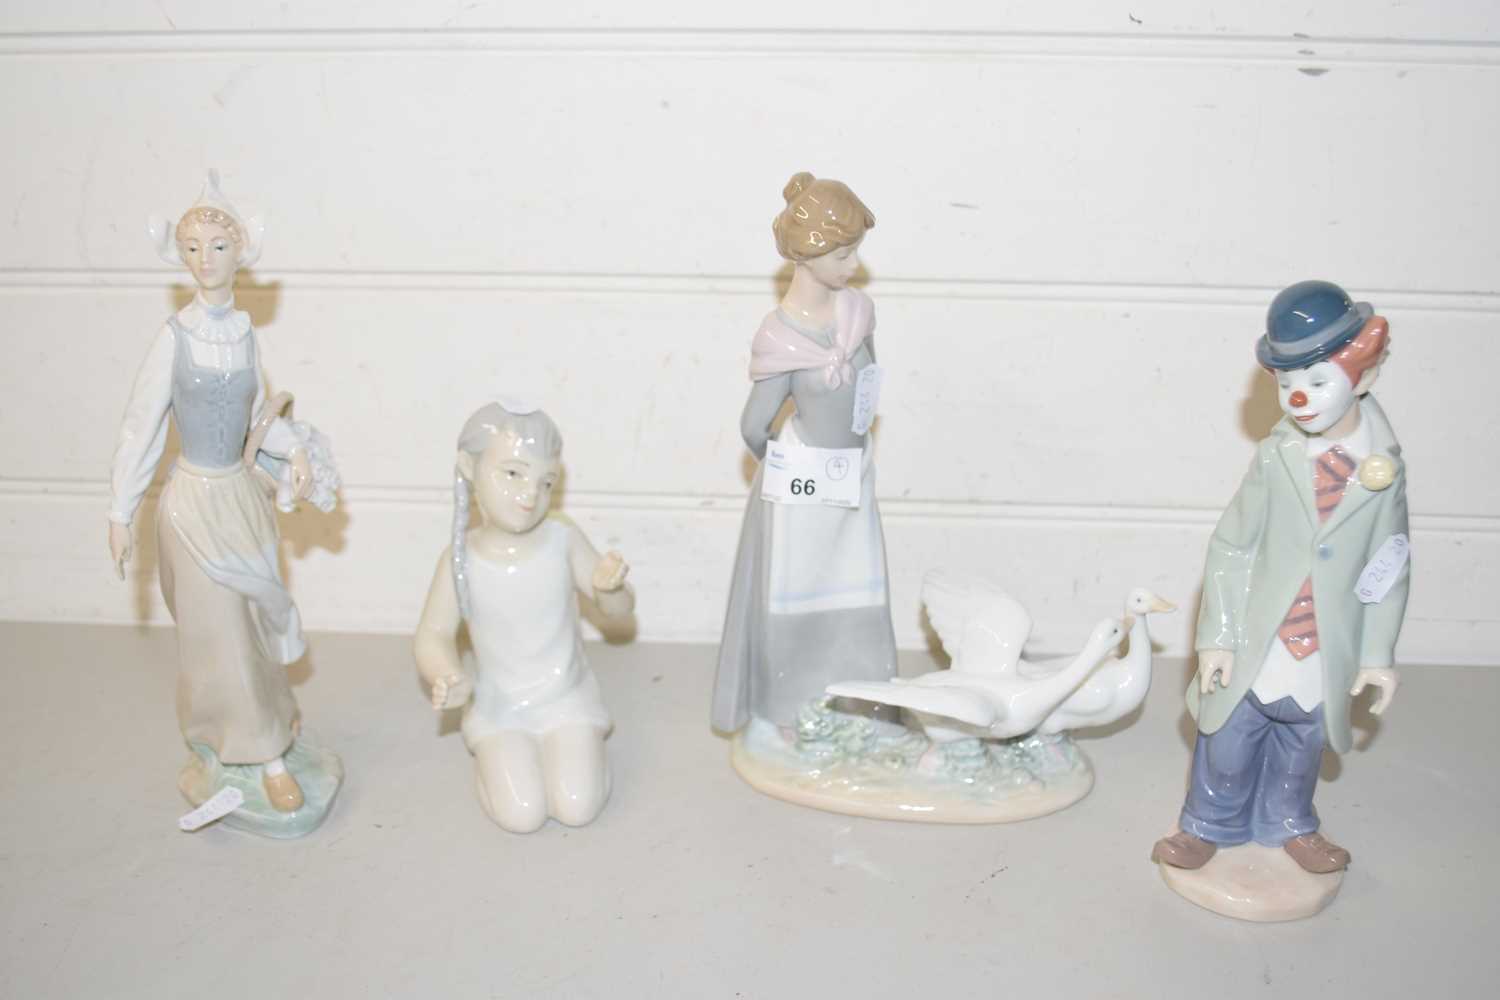 Mixed Lot: Lladro model of a clown, Lladro model of a lady with geese, further Lladro of a lady with